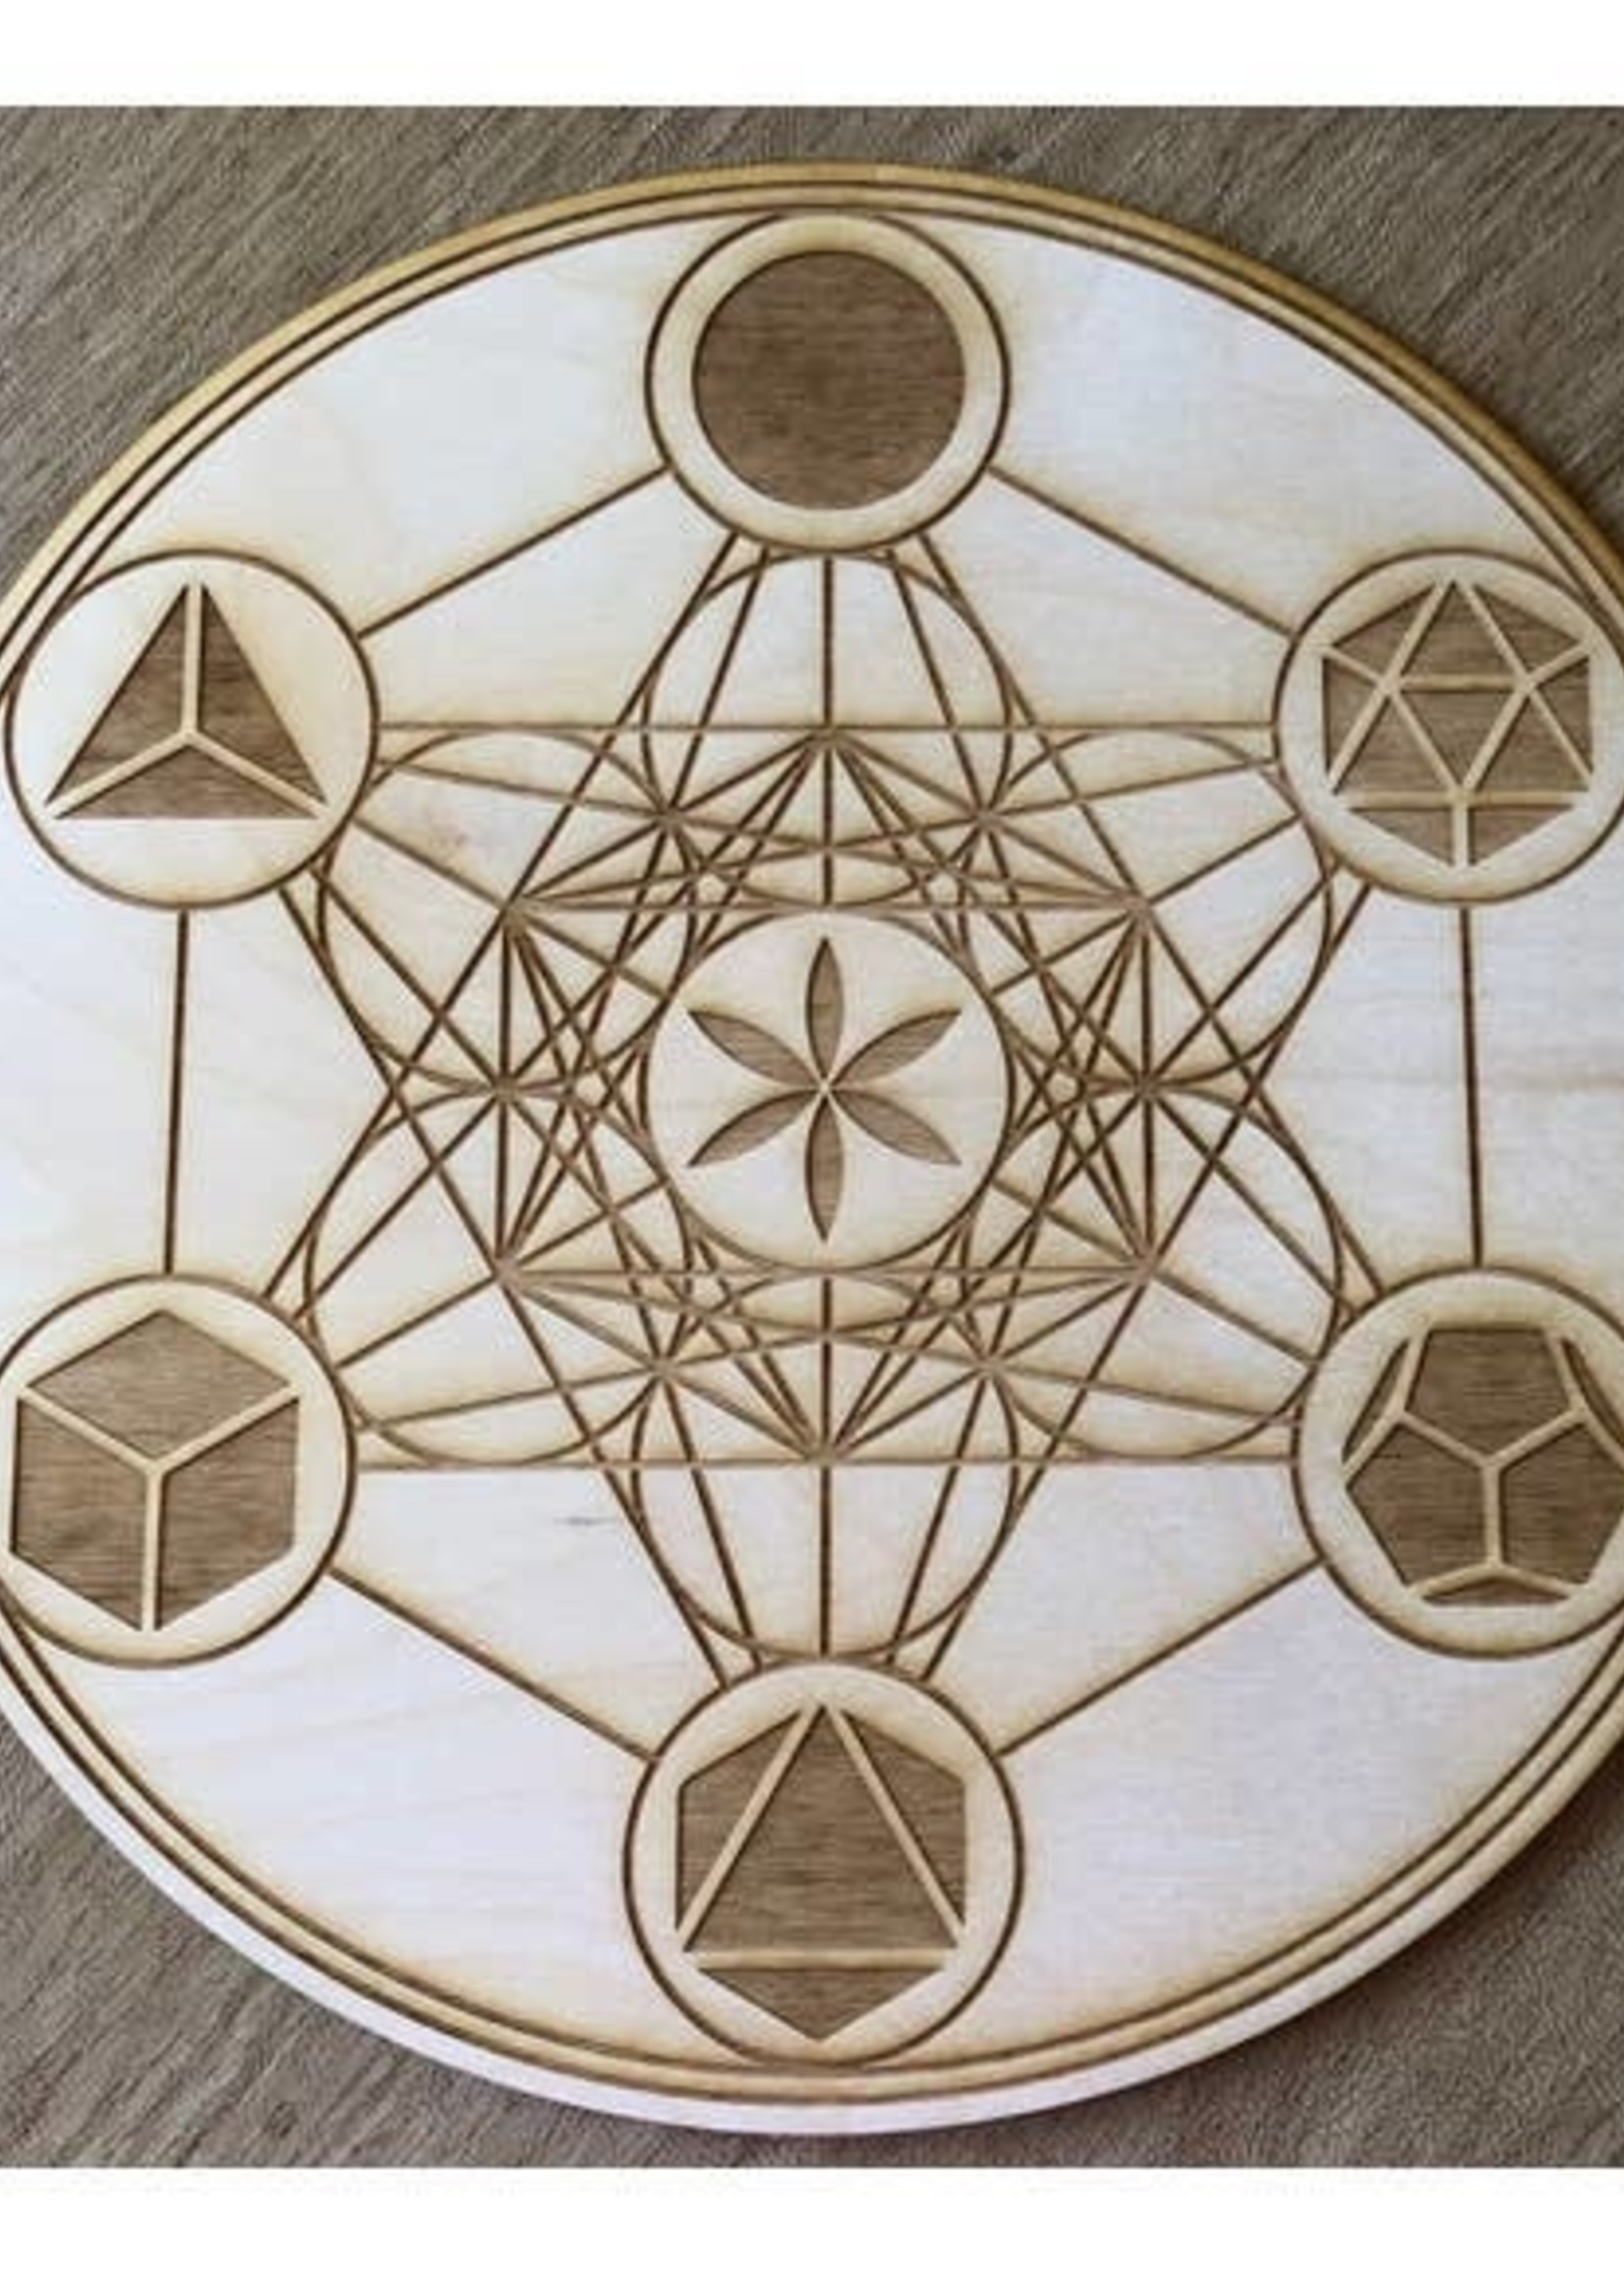 Zen and Meow Metatron's Cube Platonic Solids Crystal Grid